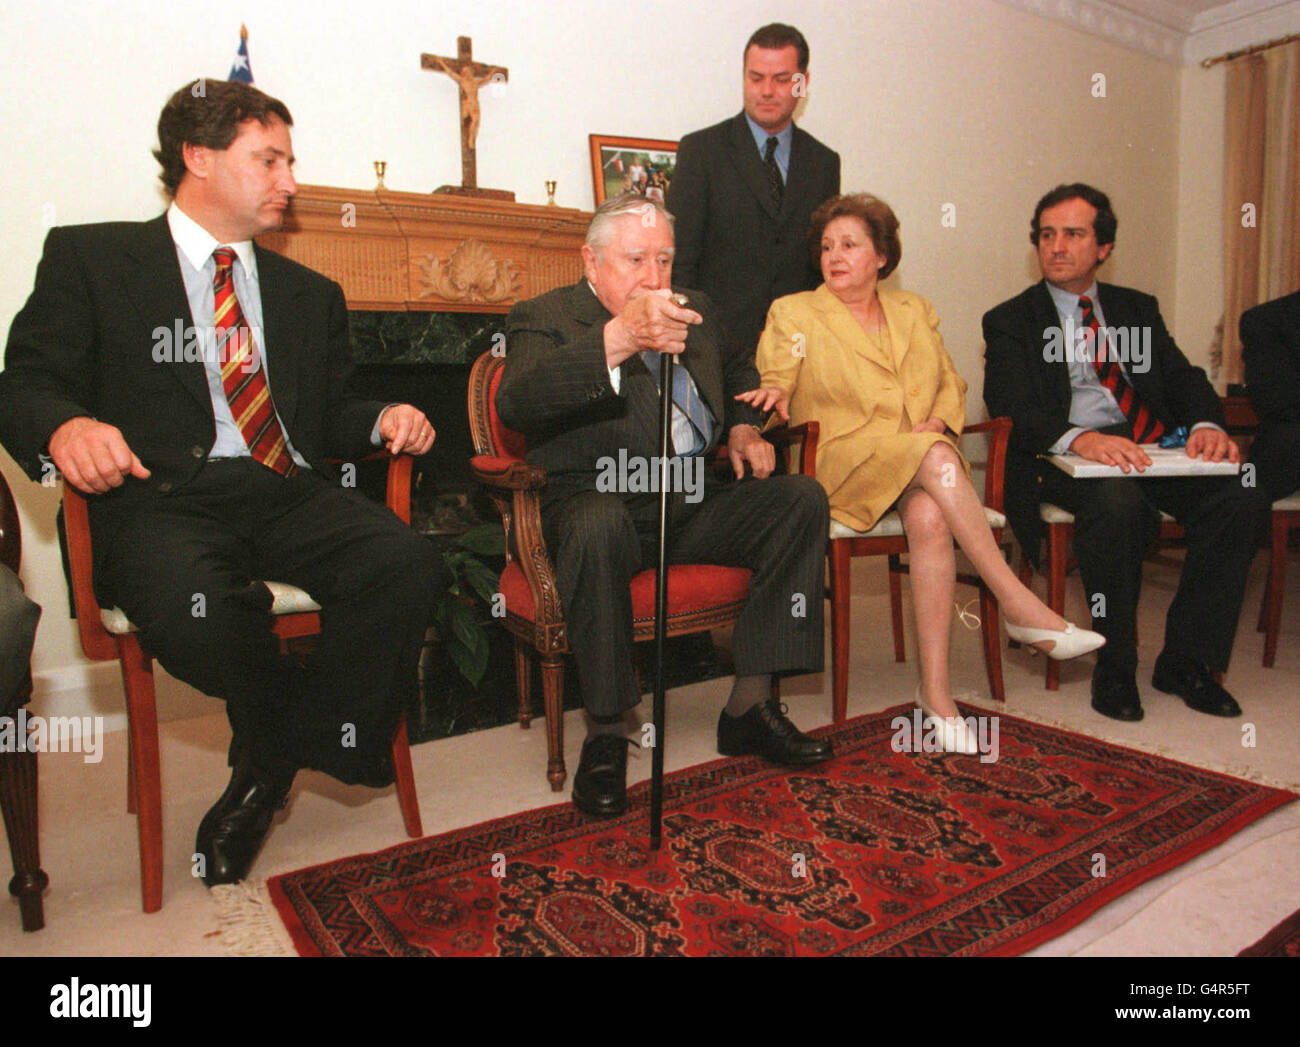 General Augusto Pinochet with his wife Lucia with a delegation of Chilian Senator's and Business leaders during a meeting which marks the 26th anniversary of the military coup which bought him to power. The delegation met at his home in Wentworth Surrey. * The meeting was held just a week before the extradition hearing which could see him sent to Spain to face torture charges.. Stock Photo